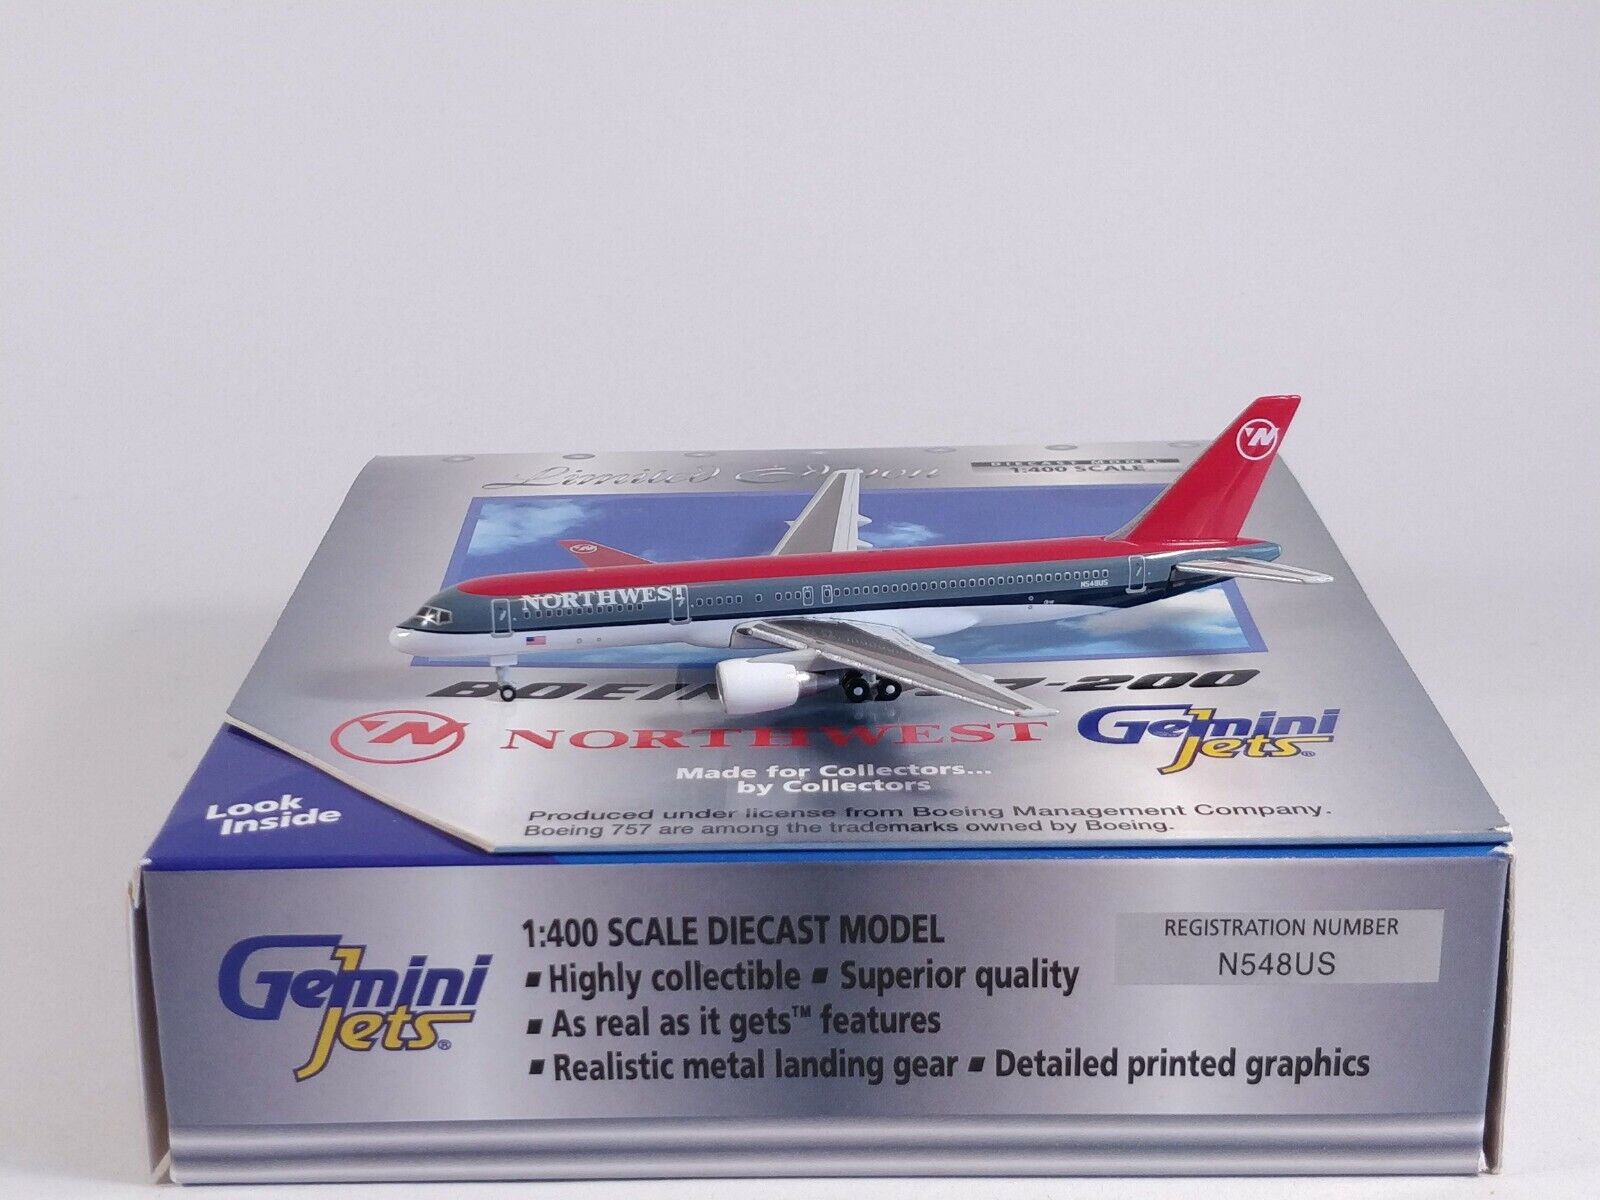 NORTHWEST AIRLINES Boeing 757-200 N548US Aircraft Model 1:400 Scale Gemini Jets